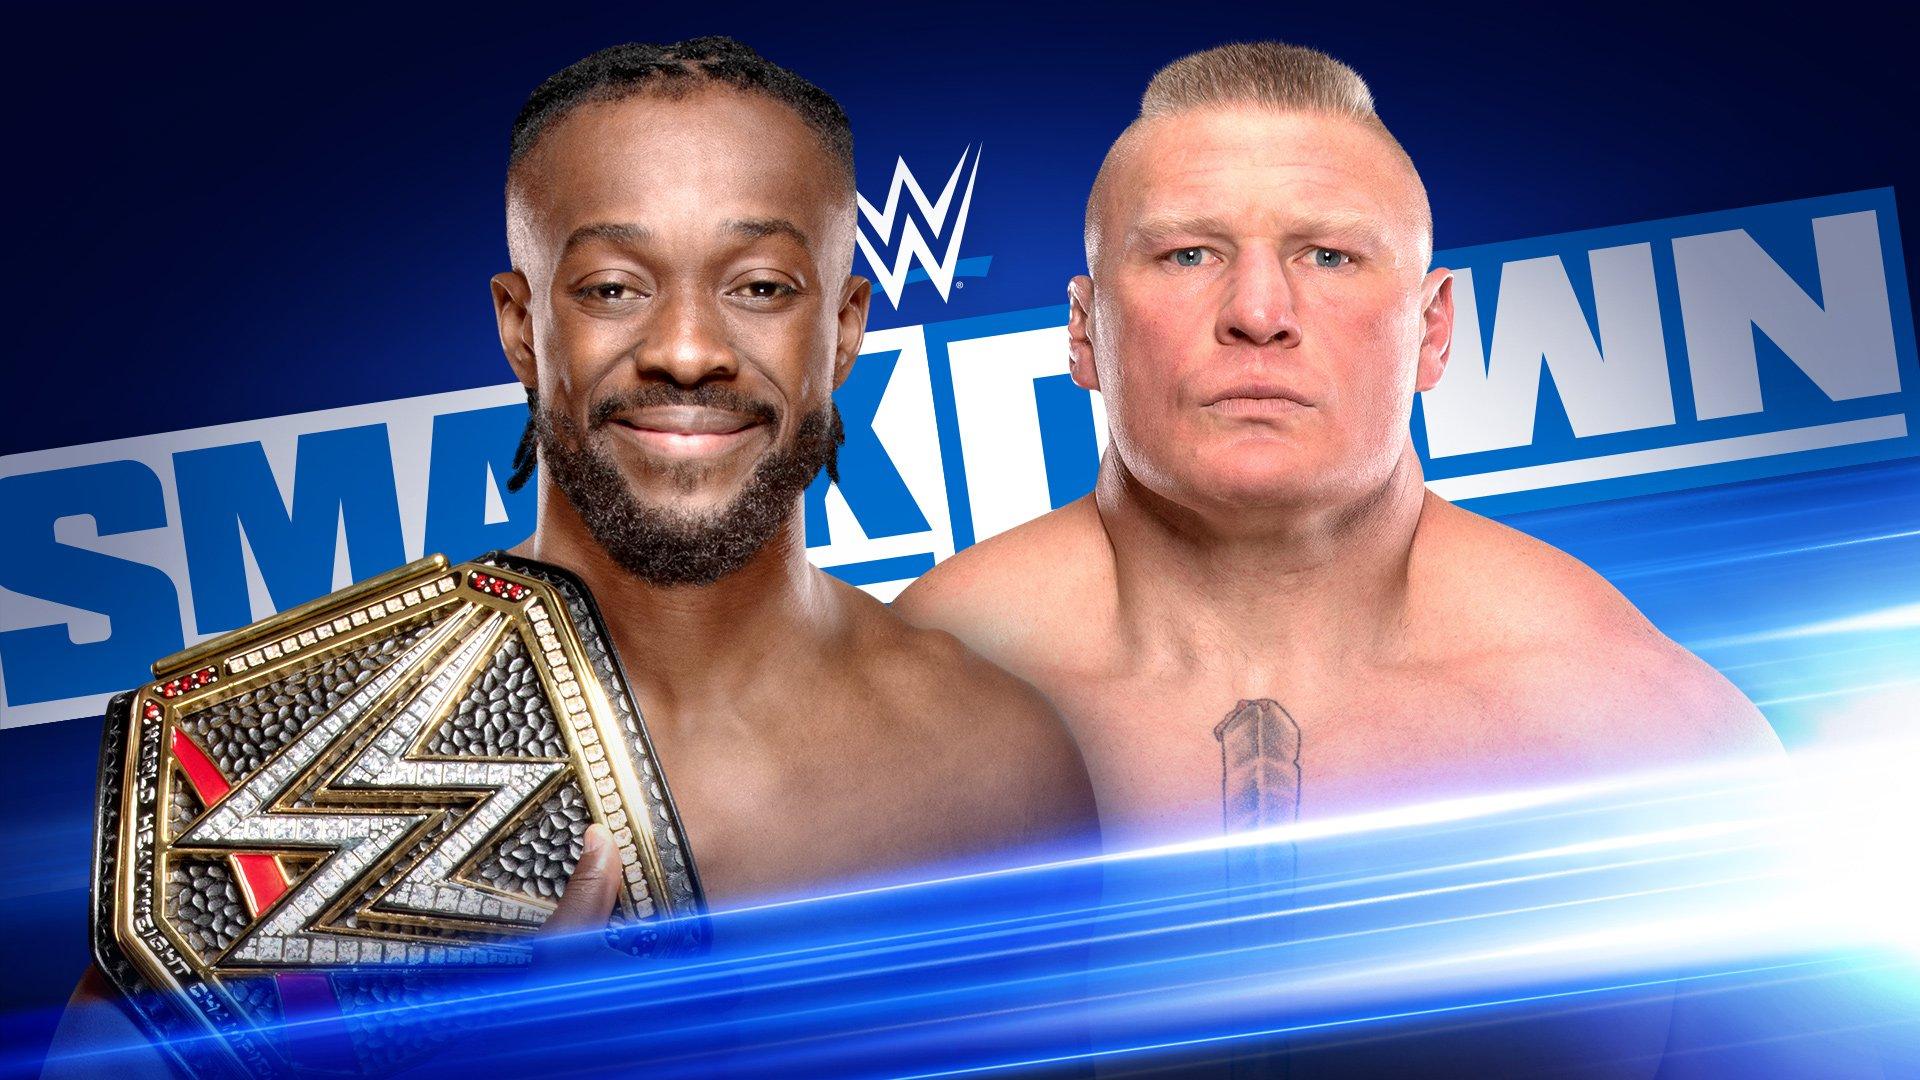 WWE Friday Night SmackDown Results — October 4th, 2019